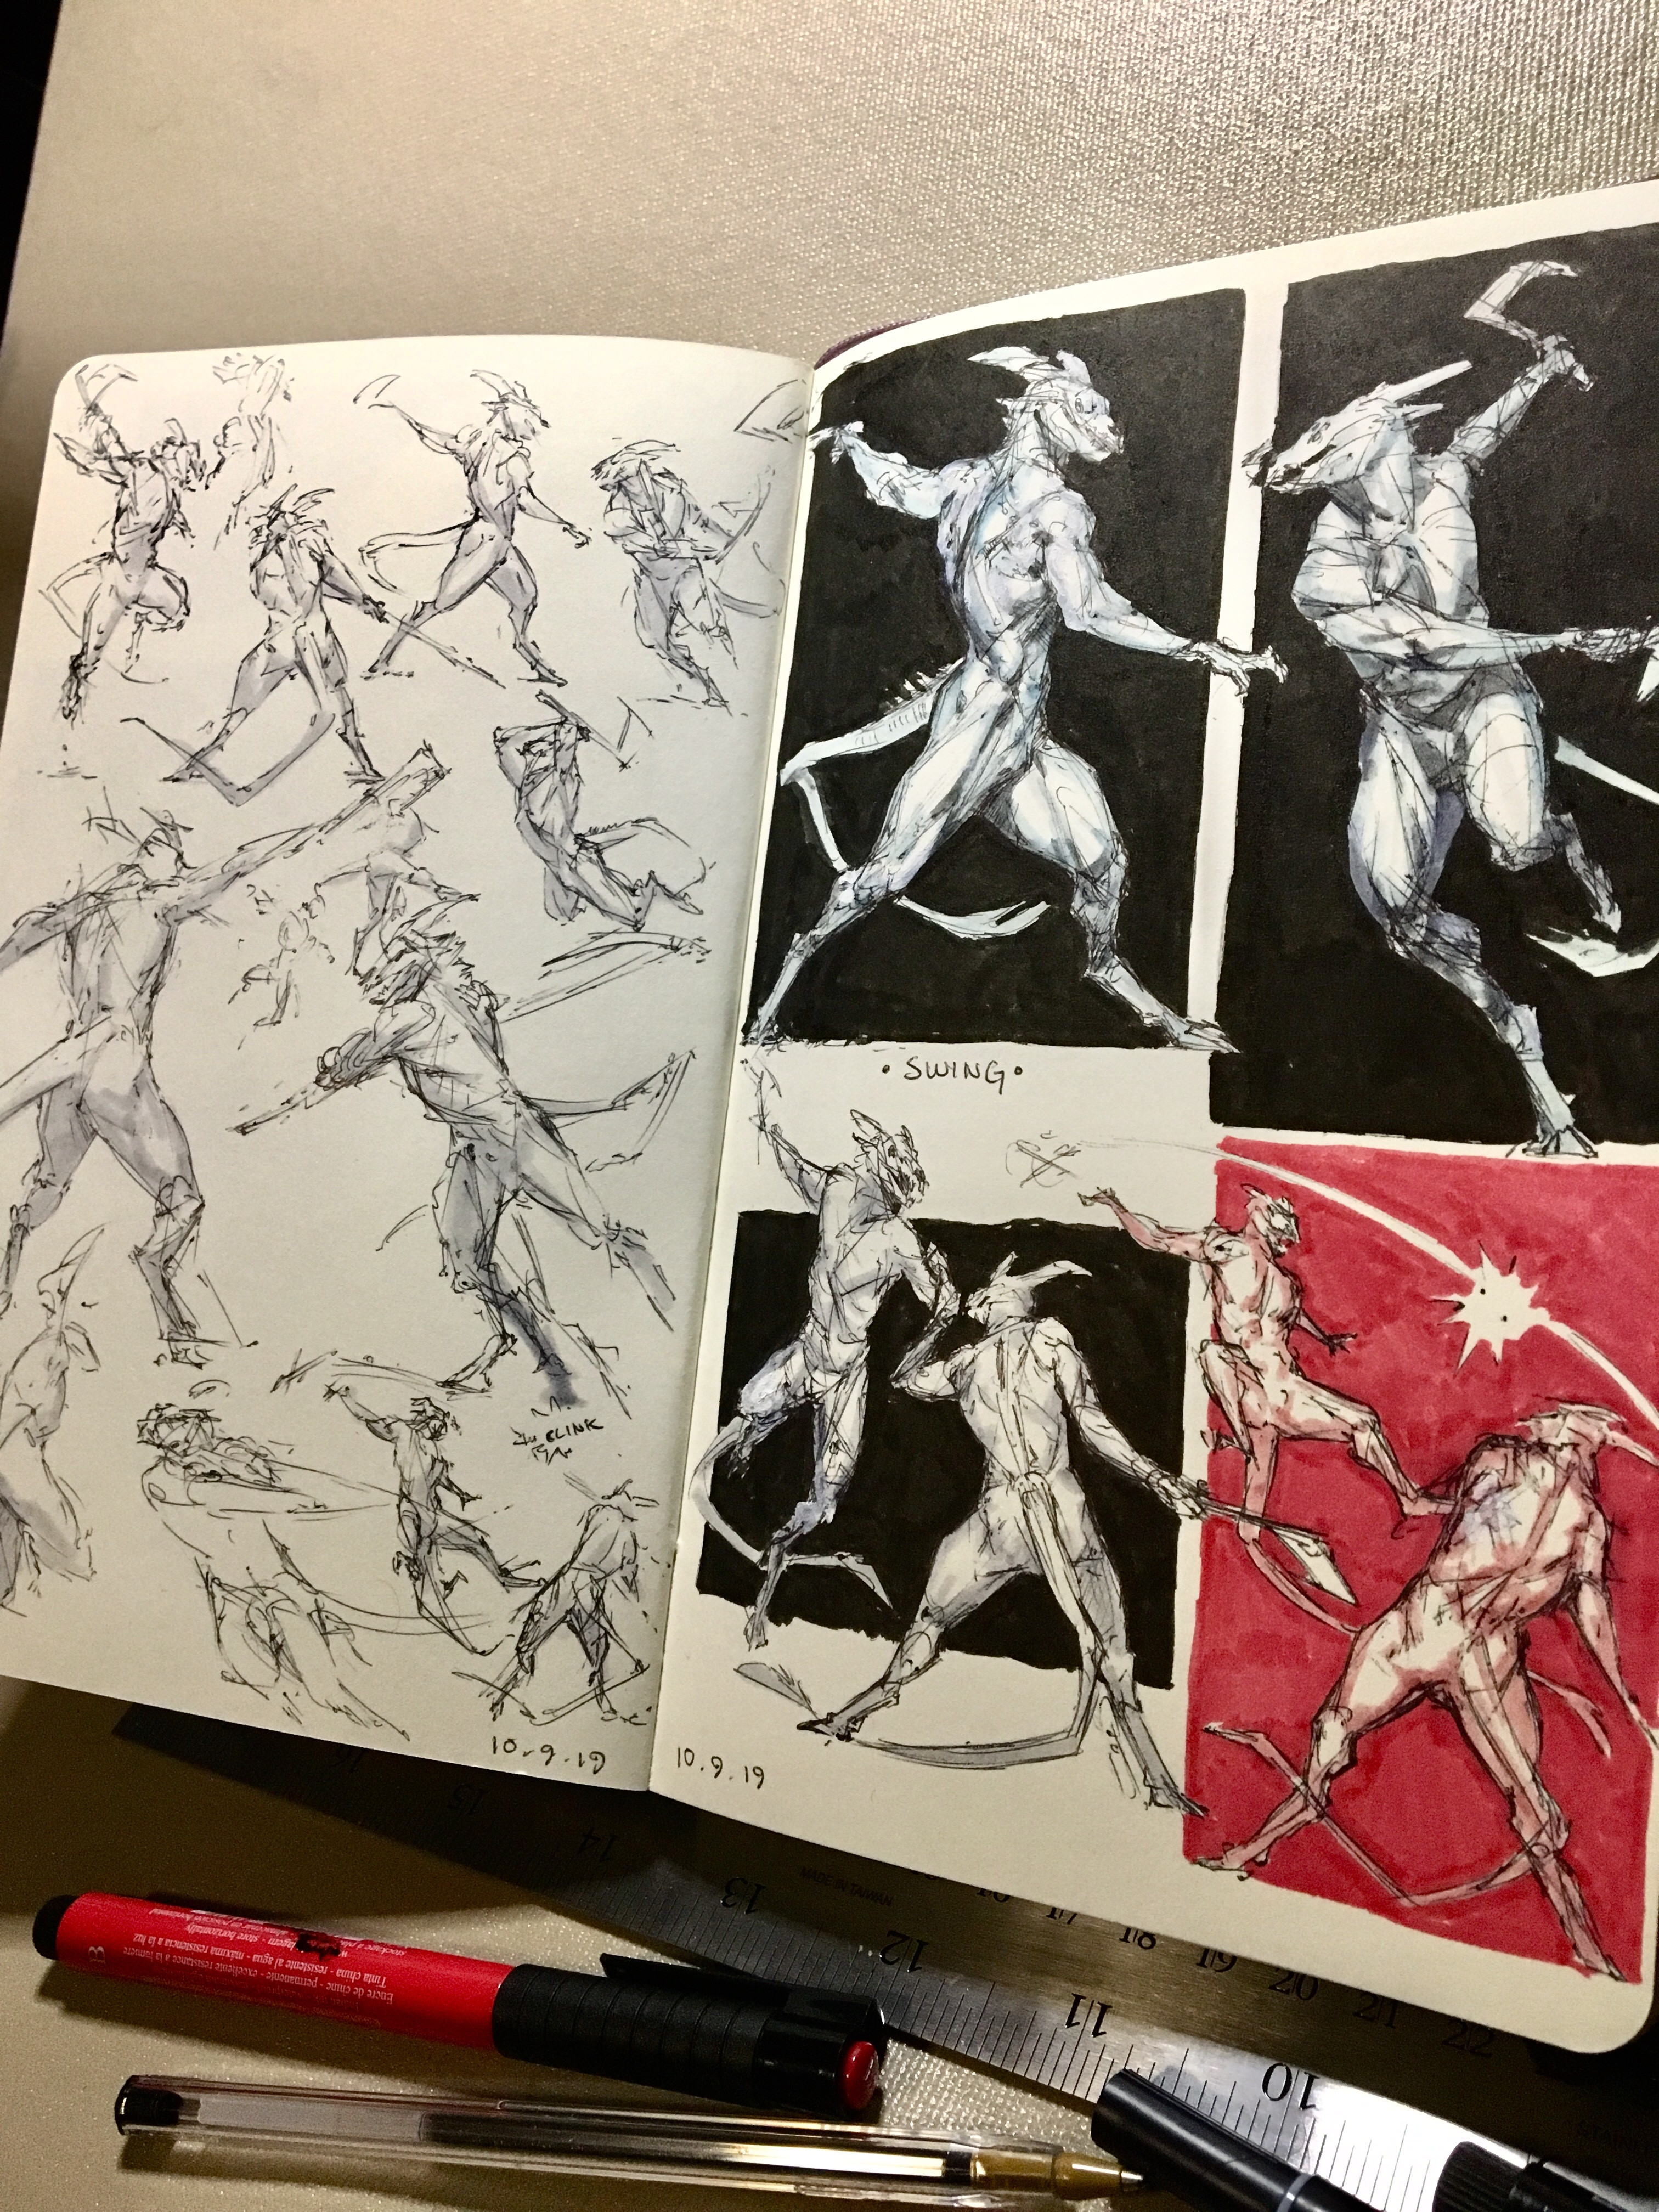 Day 9 of inktober 2019! Swing! Lots of sketches today!!! Decided to recycle some of those axe demons from a little while ago. Definitely got in my gesture practice 😋👍